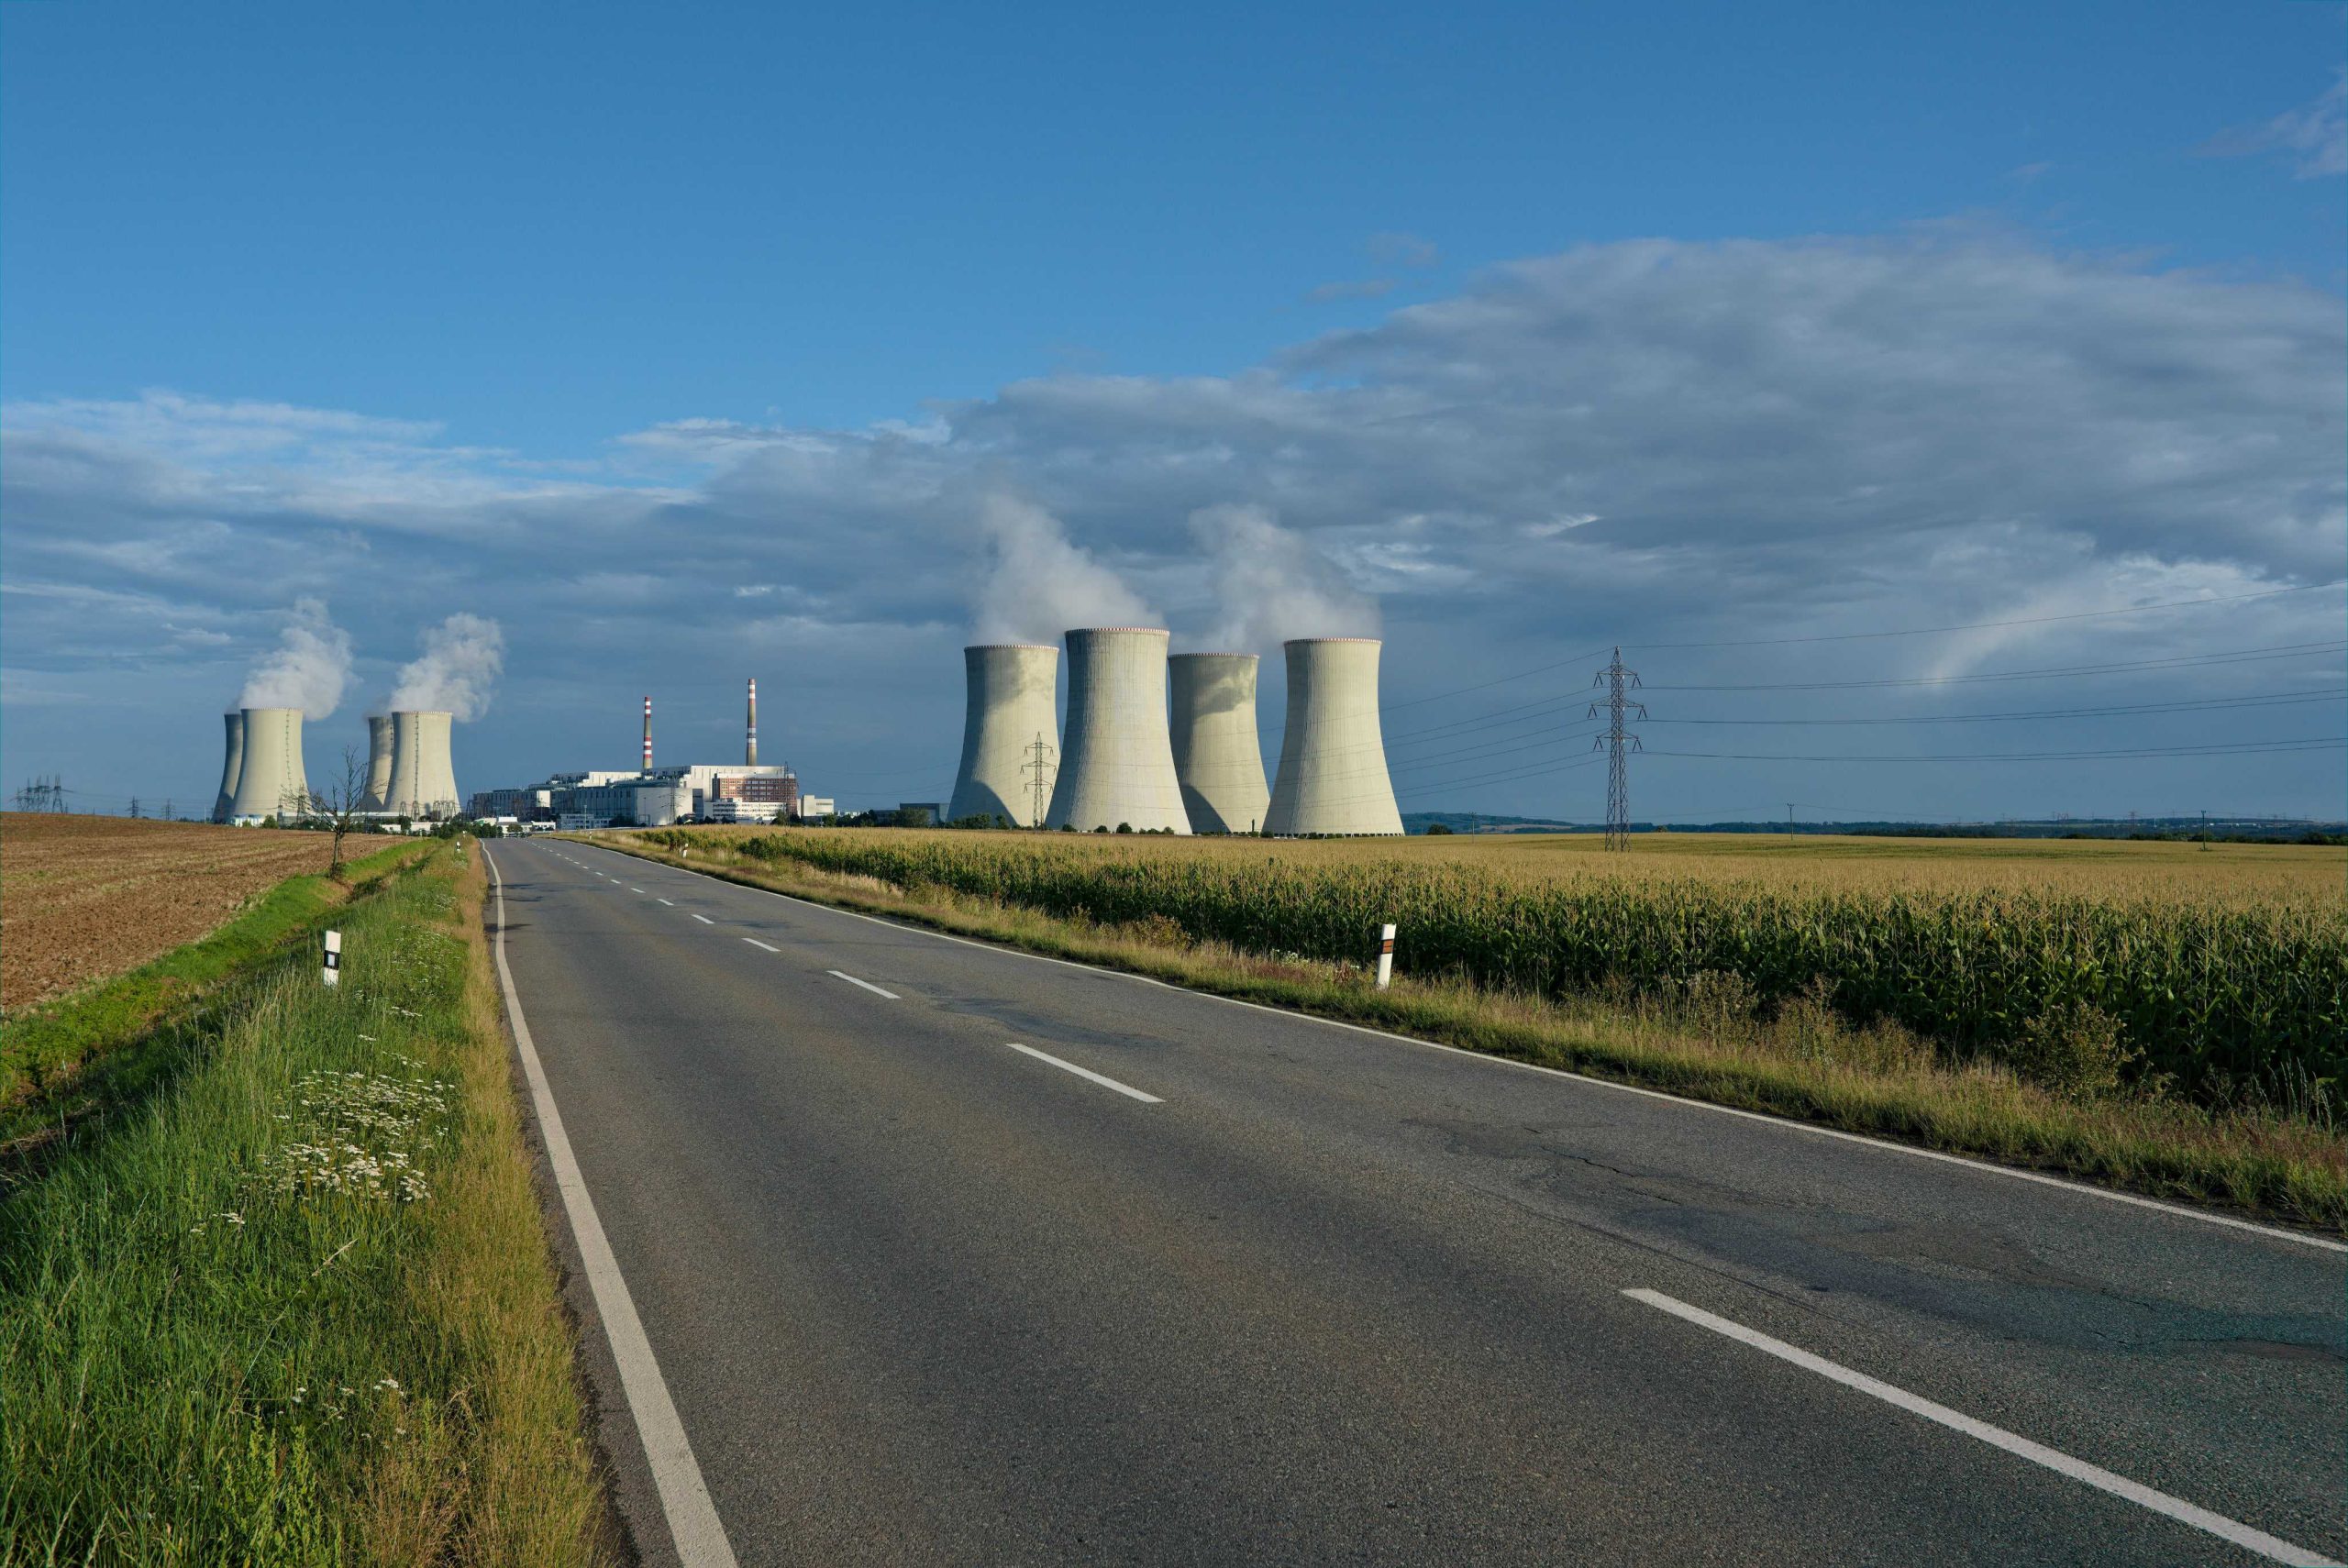 Many nation are pursuing nuclear power as a means of reducing emissions.